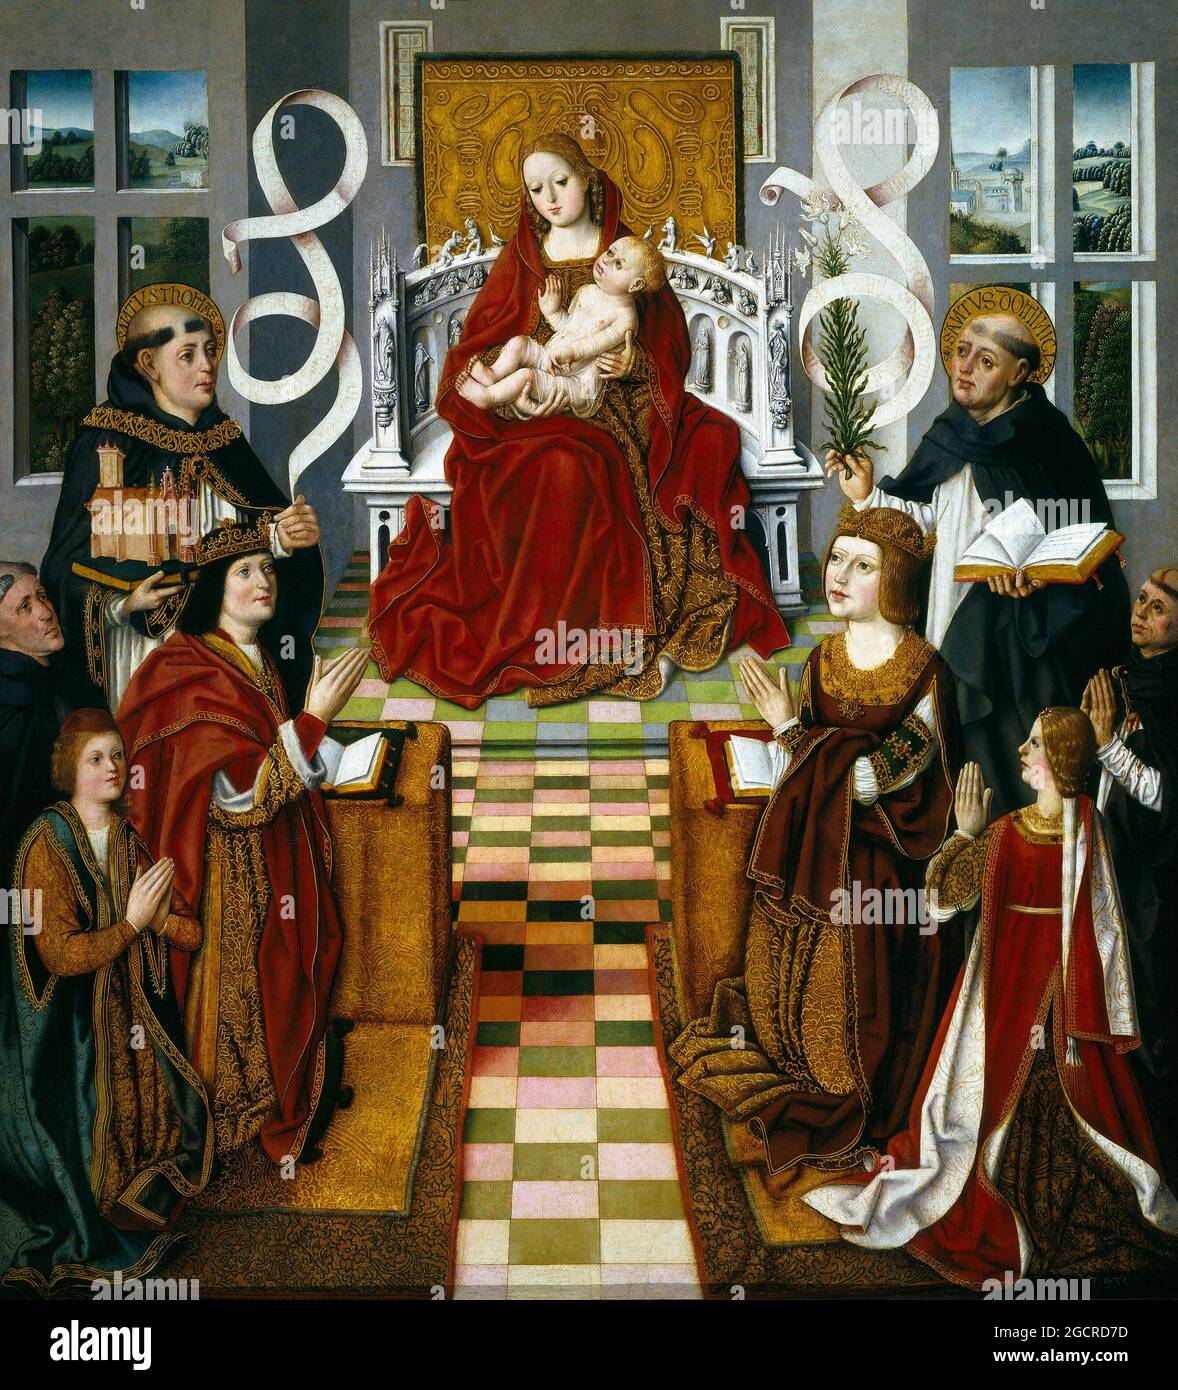 Spain: 'Madonna of the Catholic Monarchs'. Tempera on panel painting by Fernando Gallego (1440-1507) of Isabella I of Castile, c. 1490.  Isabella I (Spanish: Isabel I, Ysabel, anglicised as Elizabeth) (22 April 1451 – 26 November 1504) was Queen of Castile and Leon. She and her husband Ferdinand II of Aragon brought stability to both kingdoms that became the basis for the unification of Spain. Later the two laid the foundation for the political unification of Spain under their grandson, Charles V, Holy Roman Emperor. Stock Photo